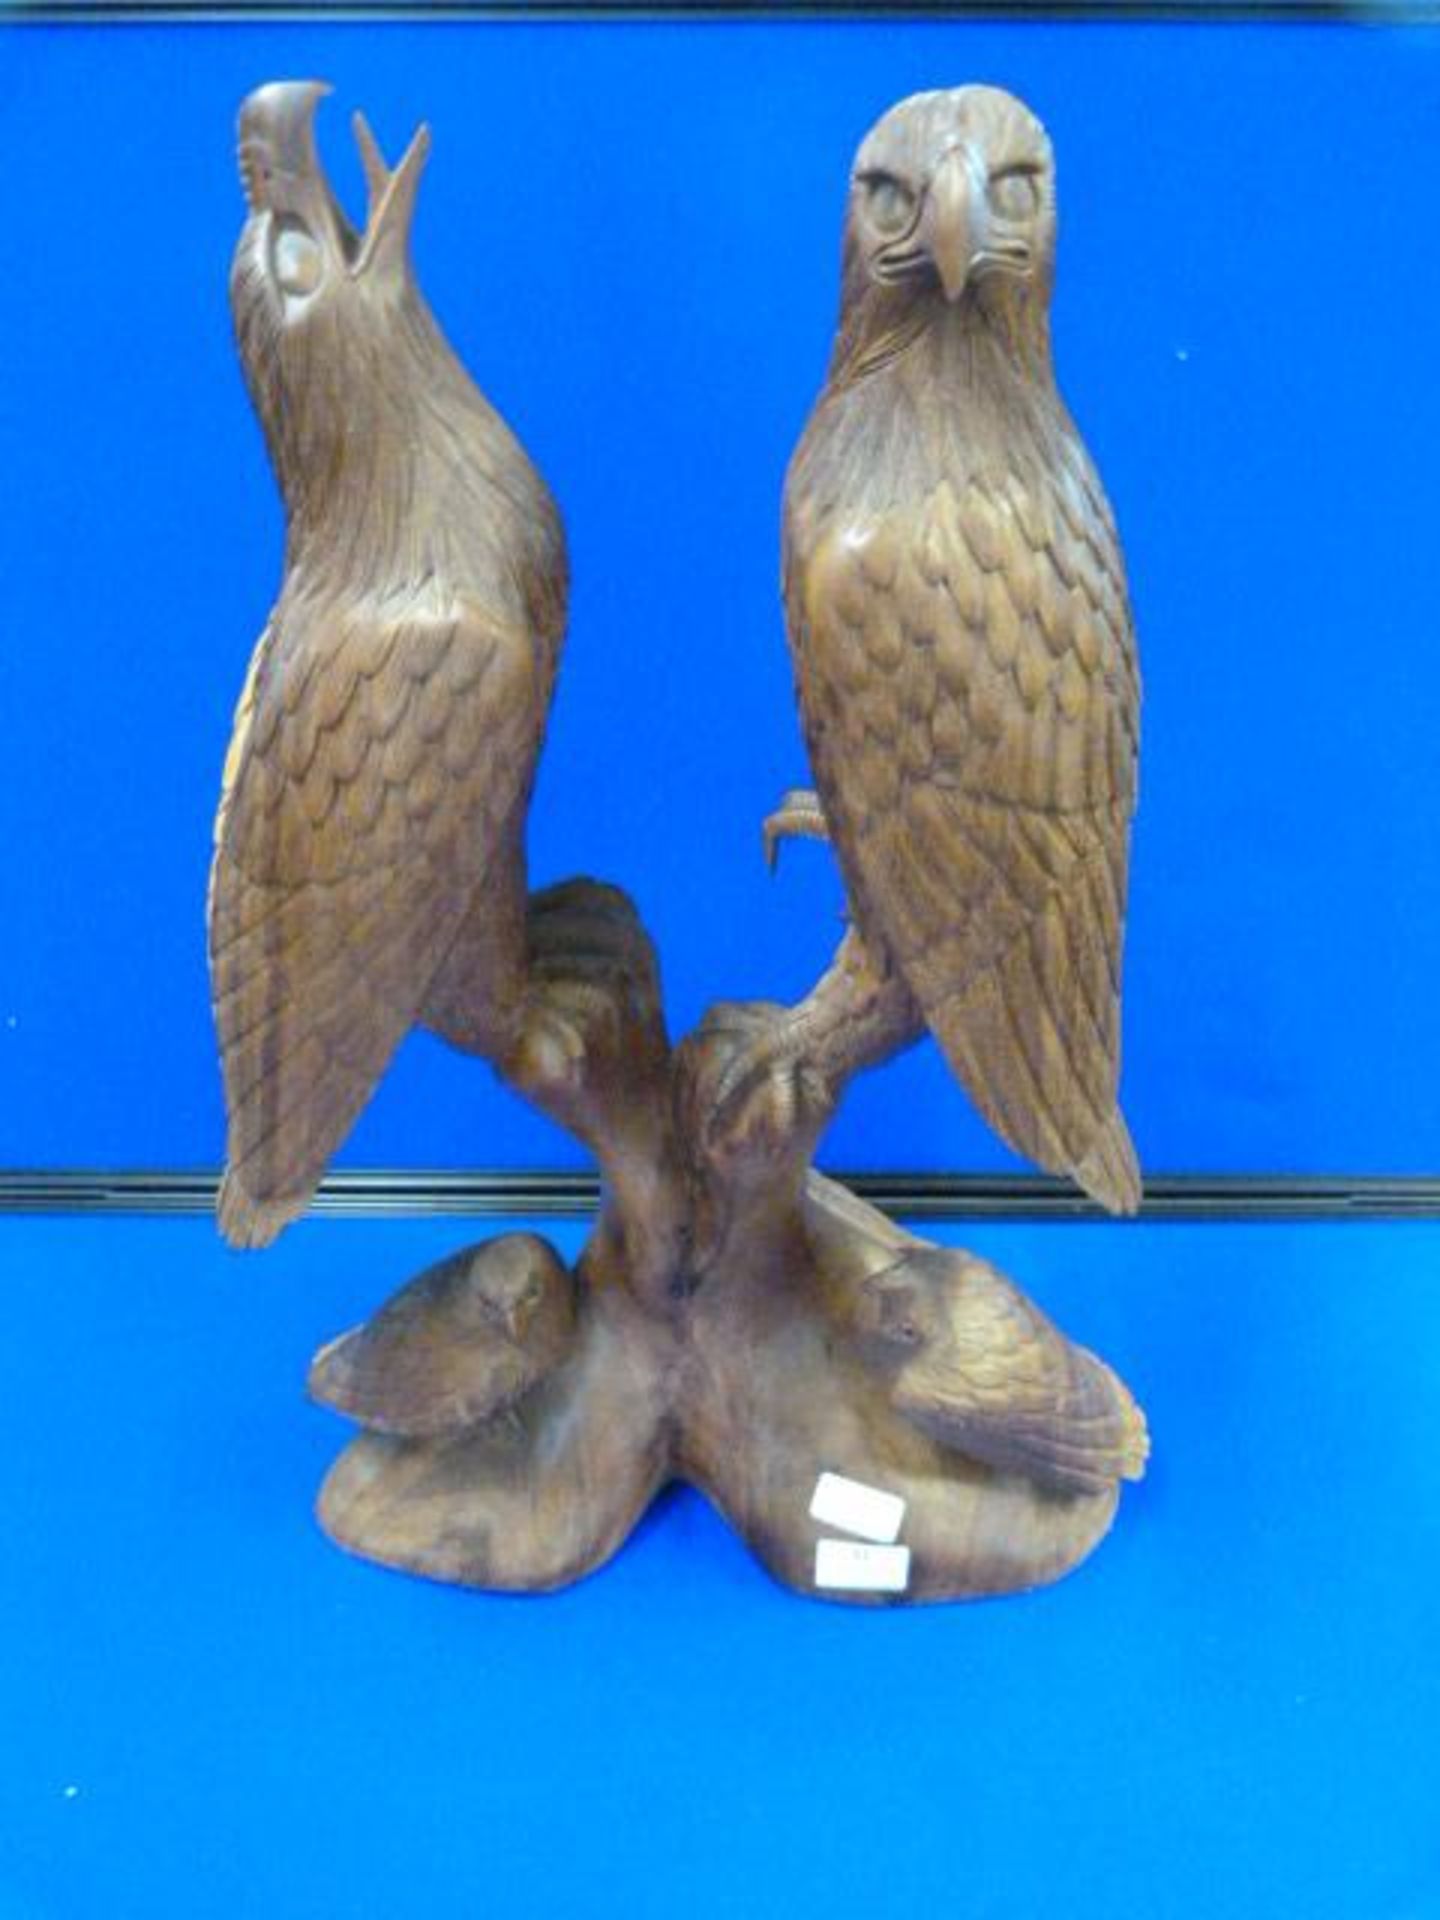 Carved Wood Figurine of Two Eagles with Chicks - Approx. 56cm H x 38cm W